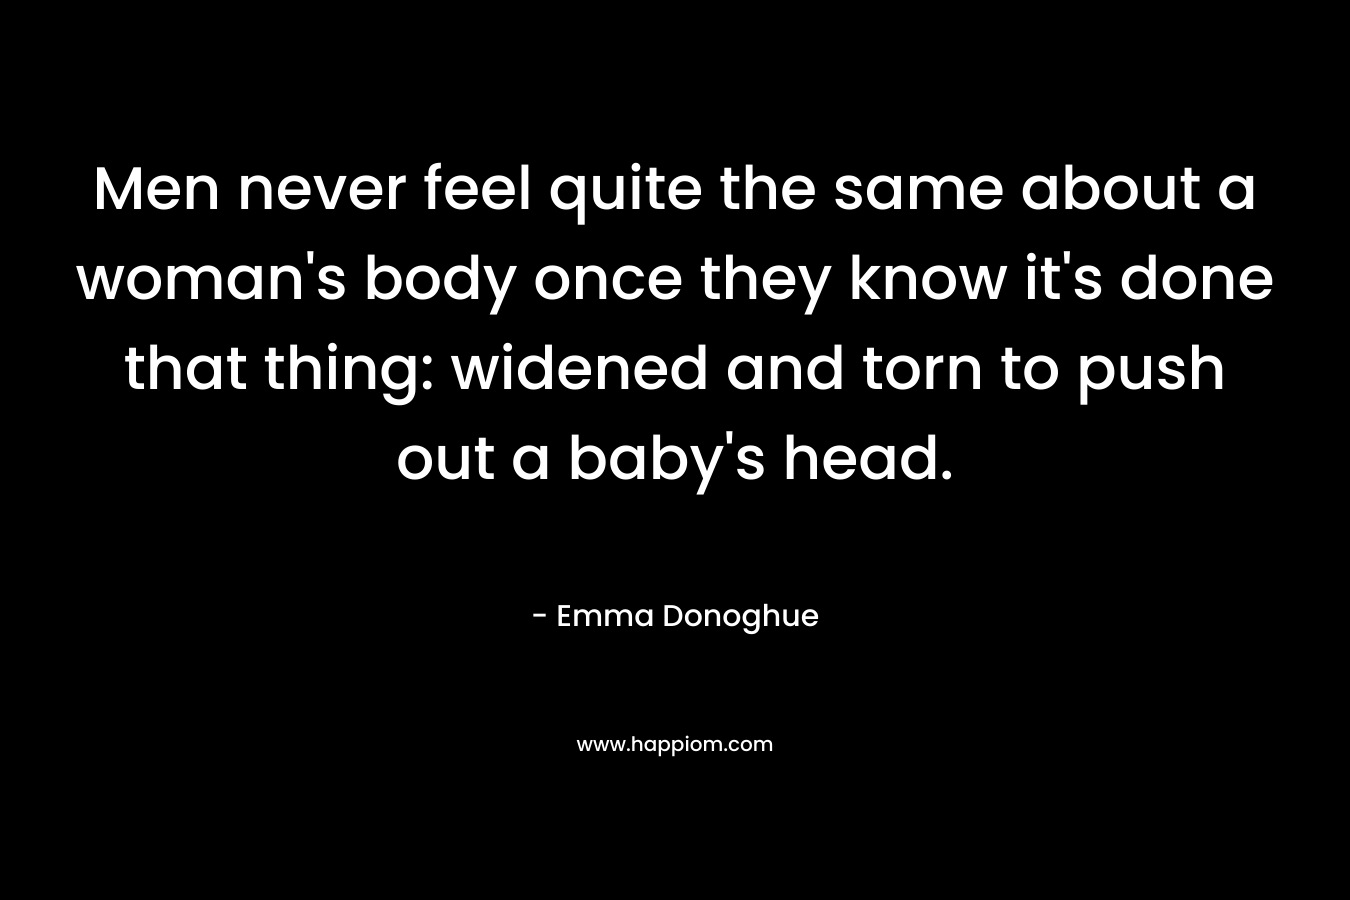 Men never feel quite the same about a woman's body once they know it's done that thing: widened and torn to push out a baby's head.